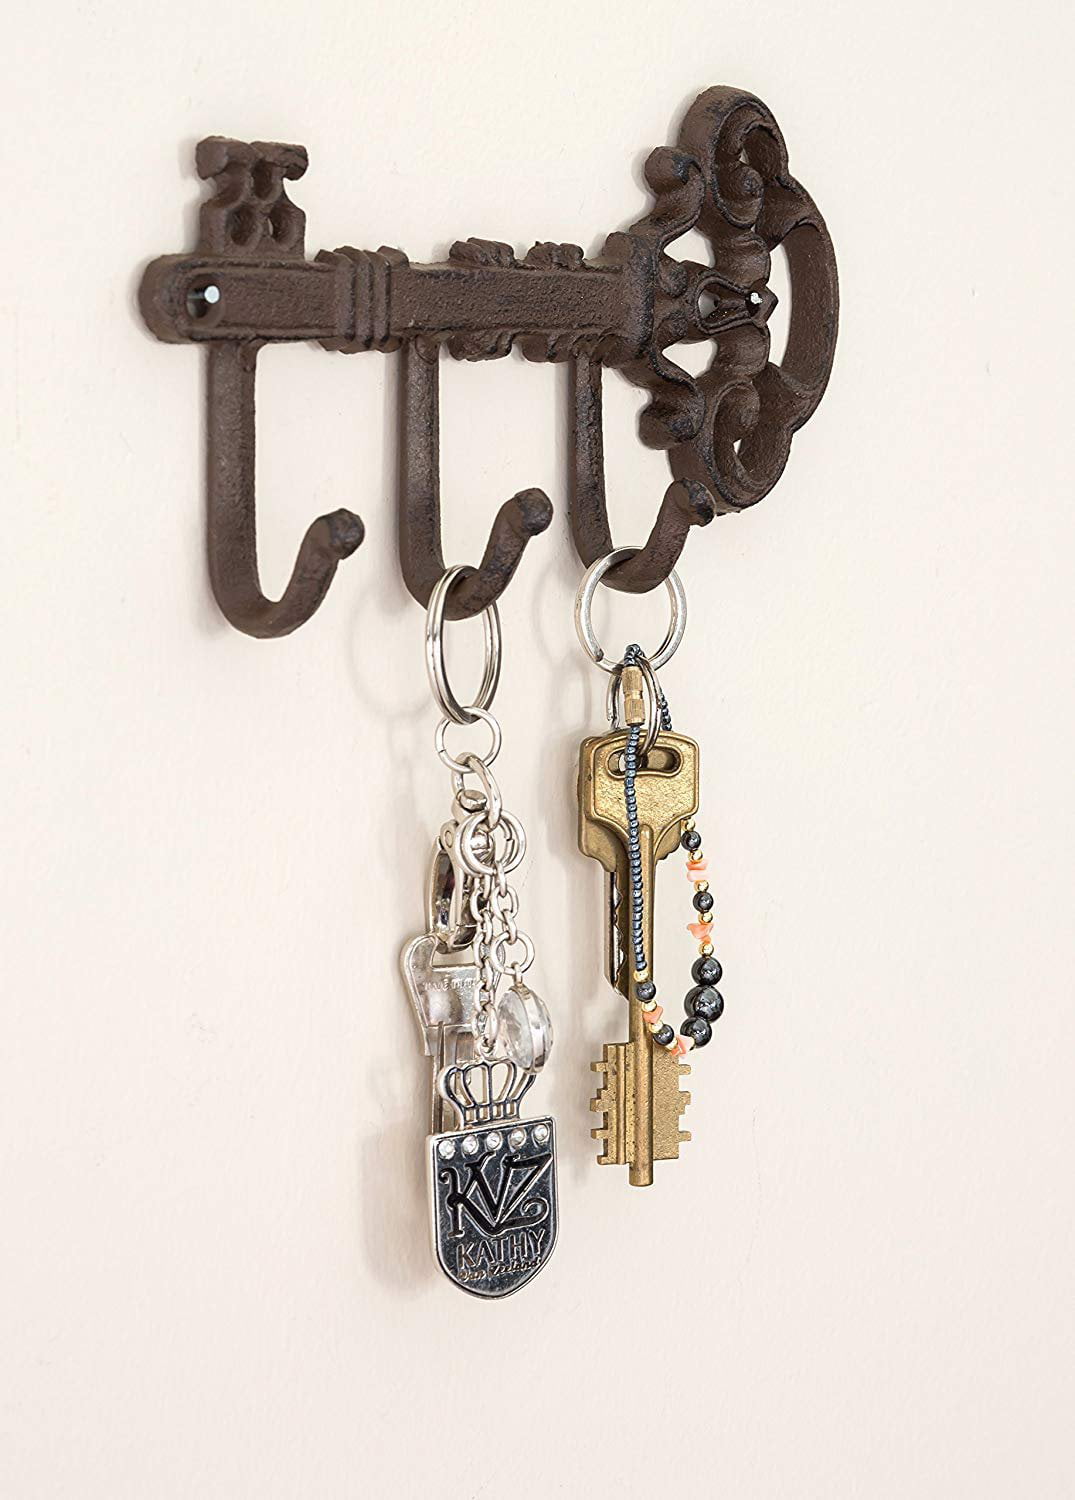 LULIND Wall Mounted Rustic Key Holder with 3 Hooks Vintage Cast Iron 